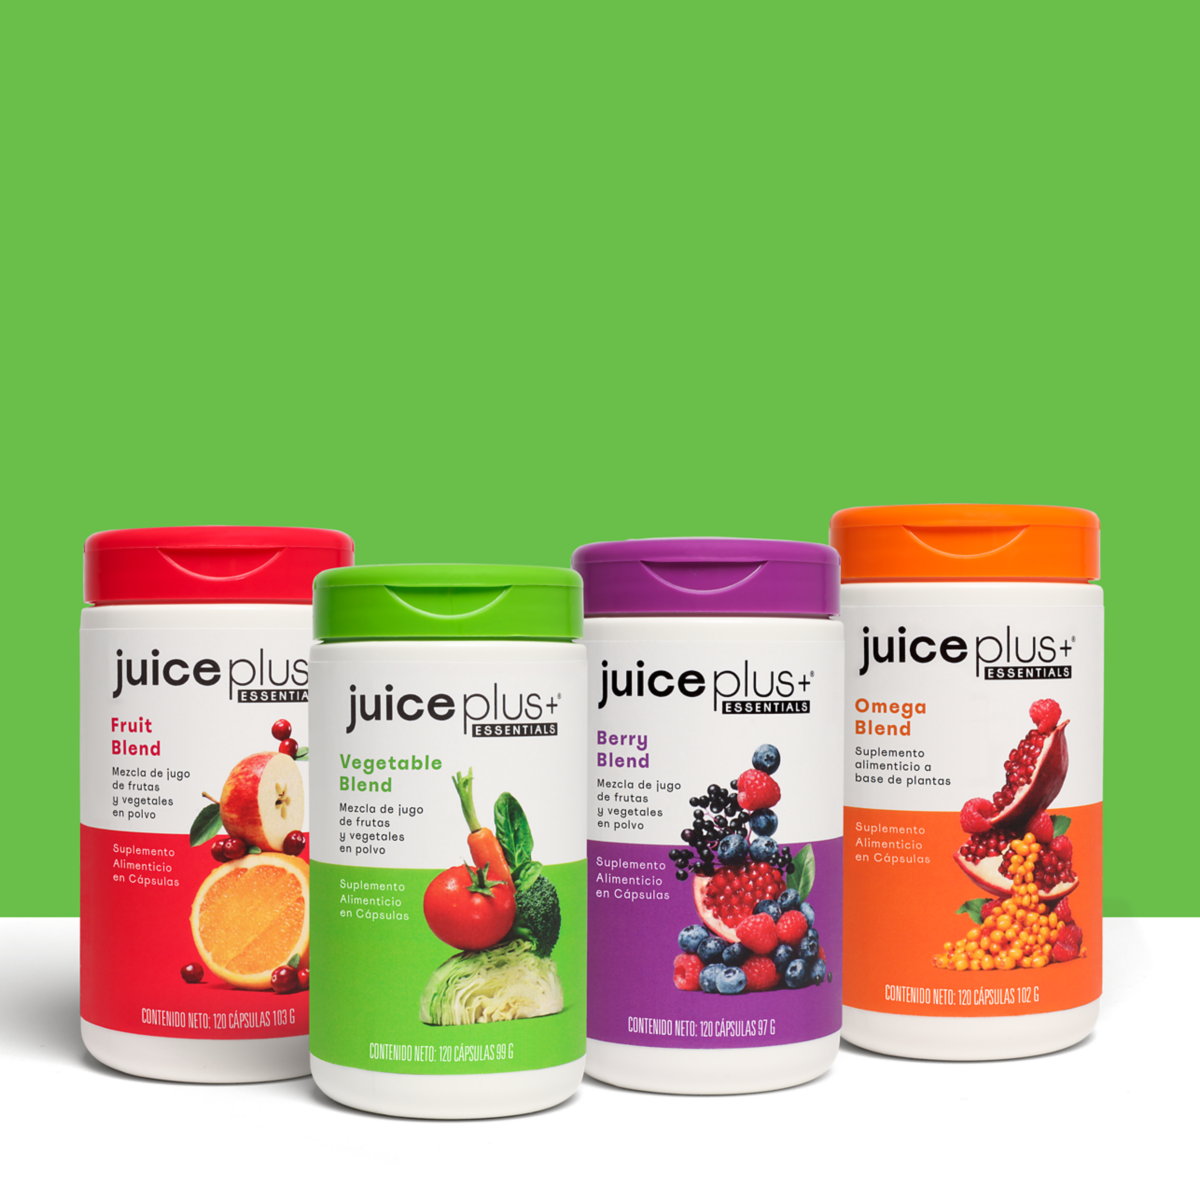 What is Juice Plus+?